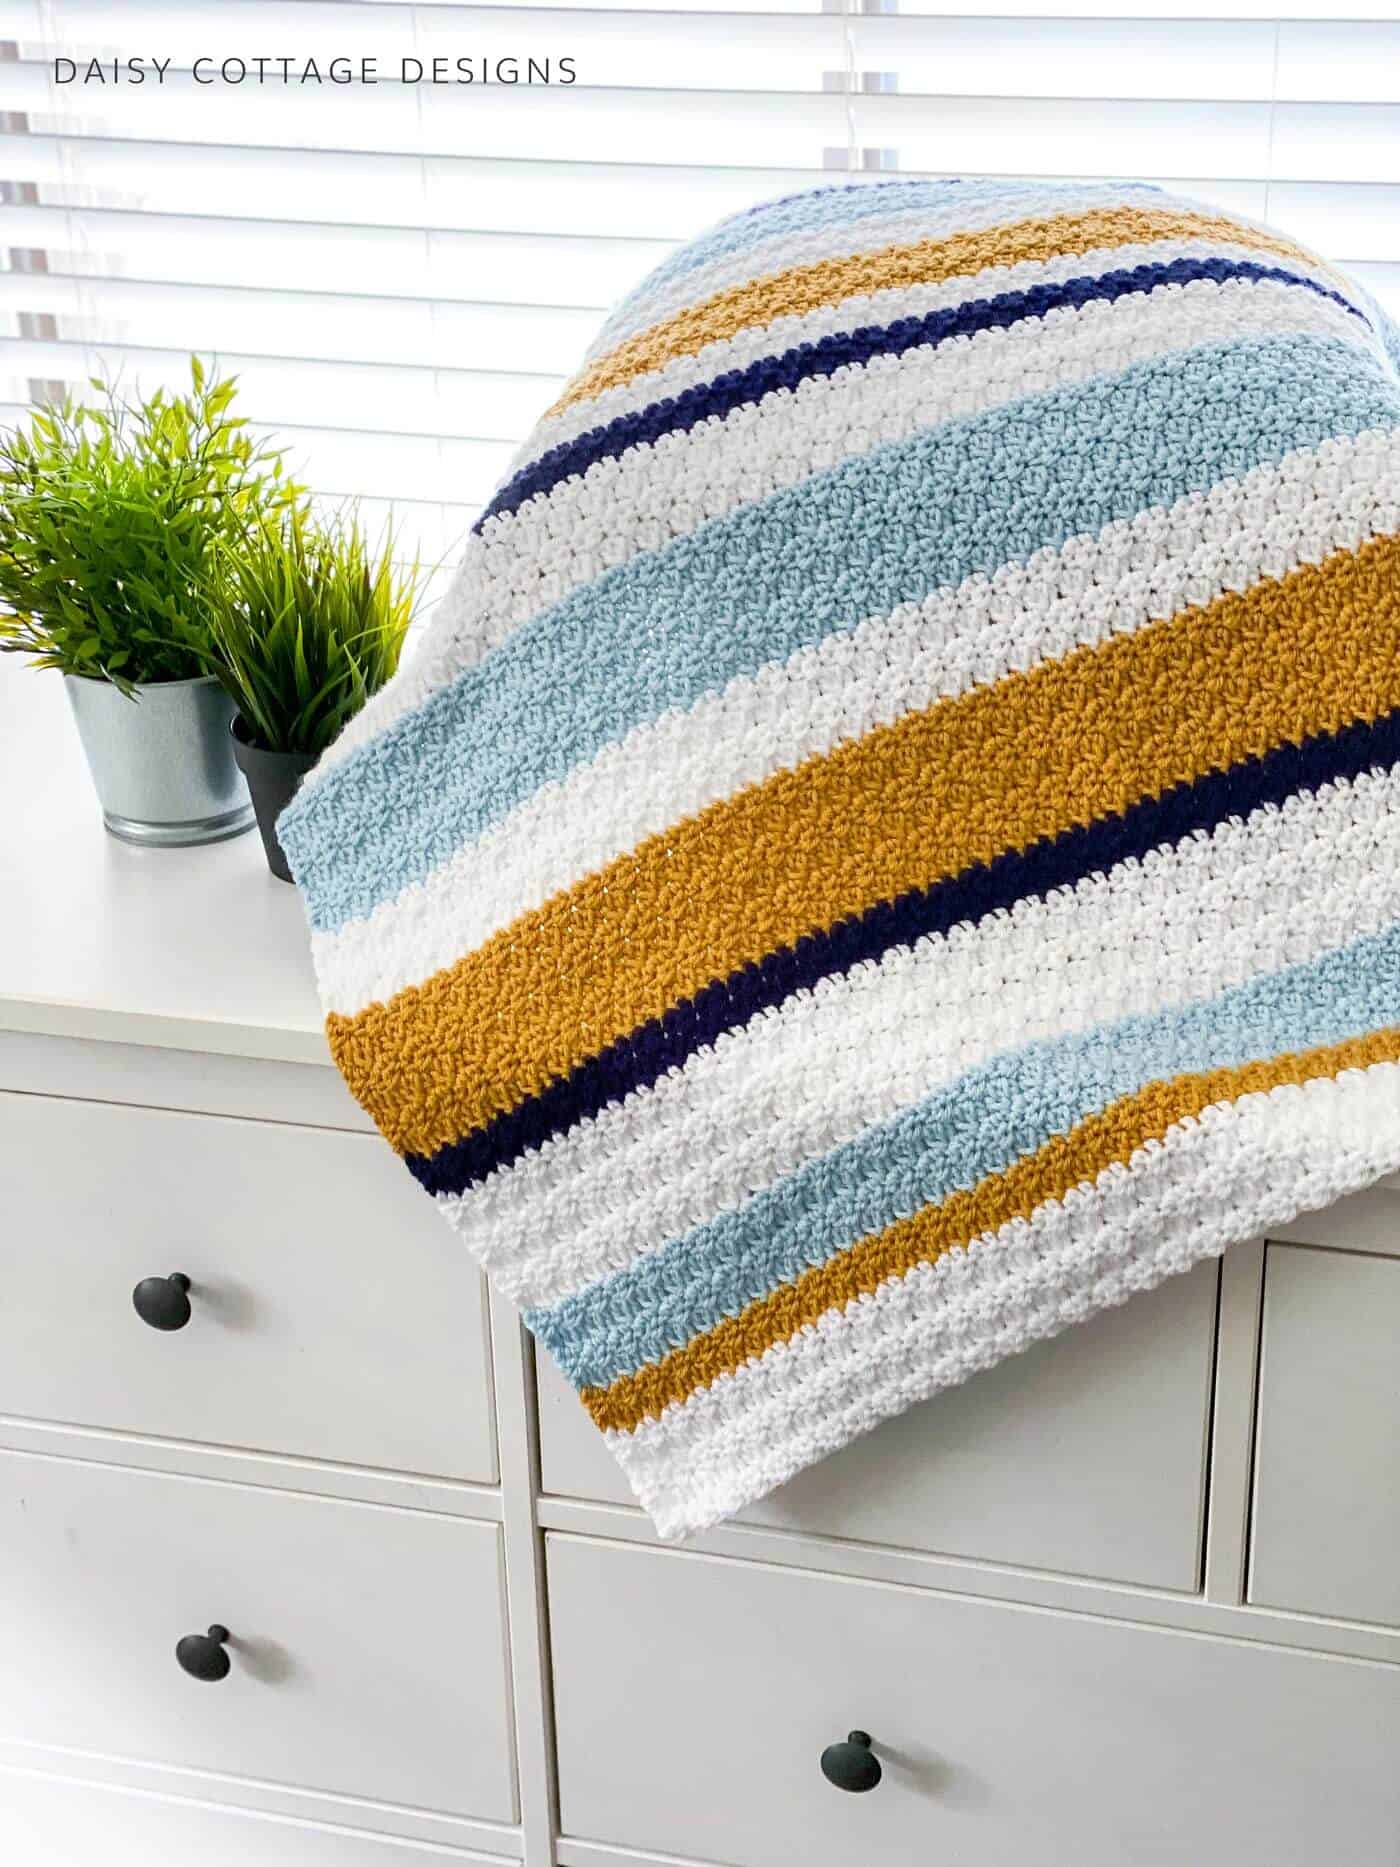 striped crochet blanket on a cabinet next to window blinds